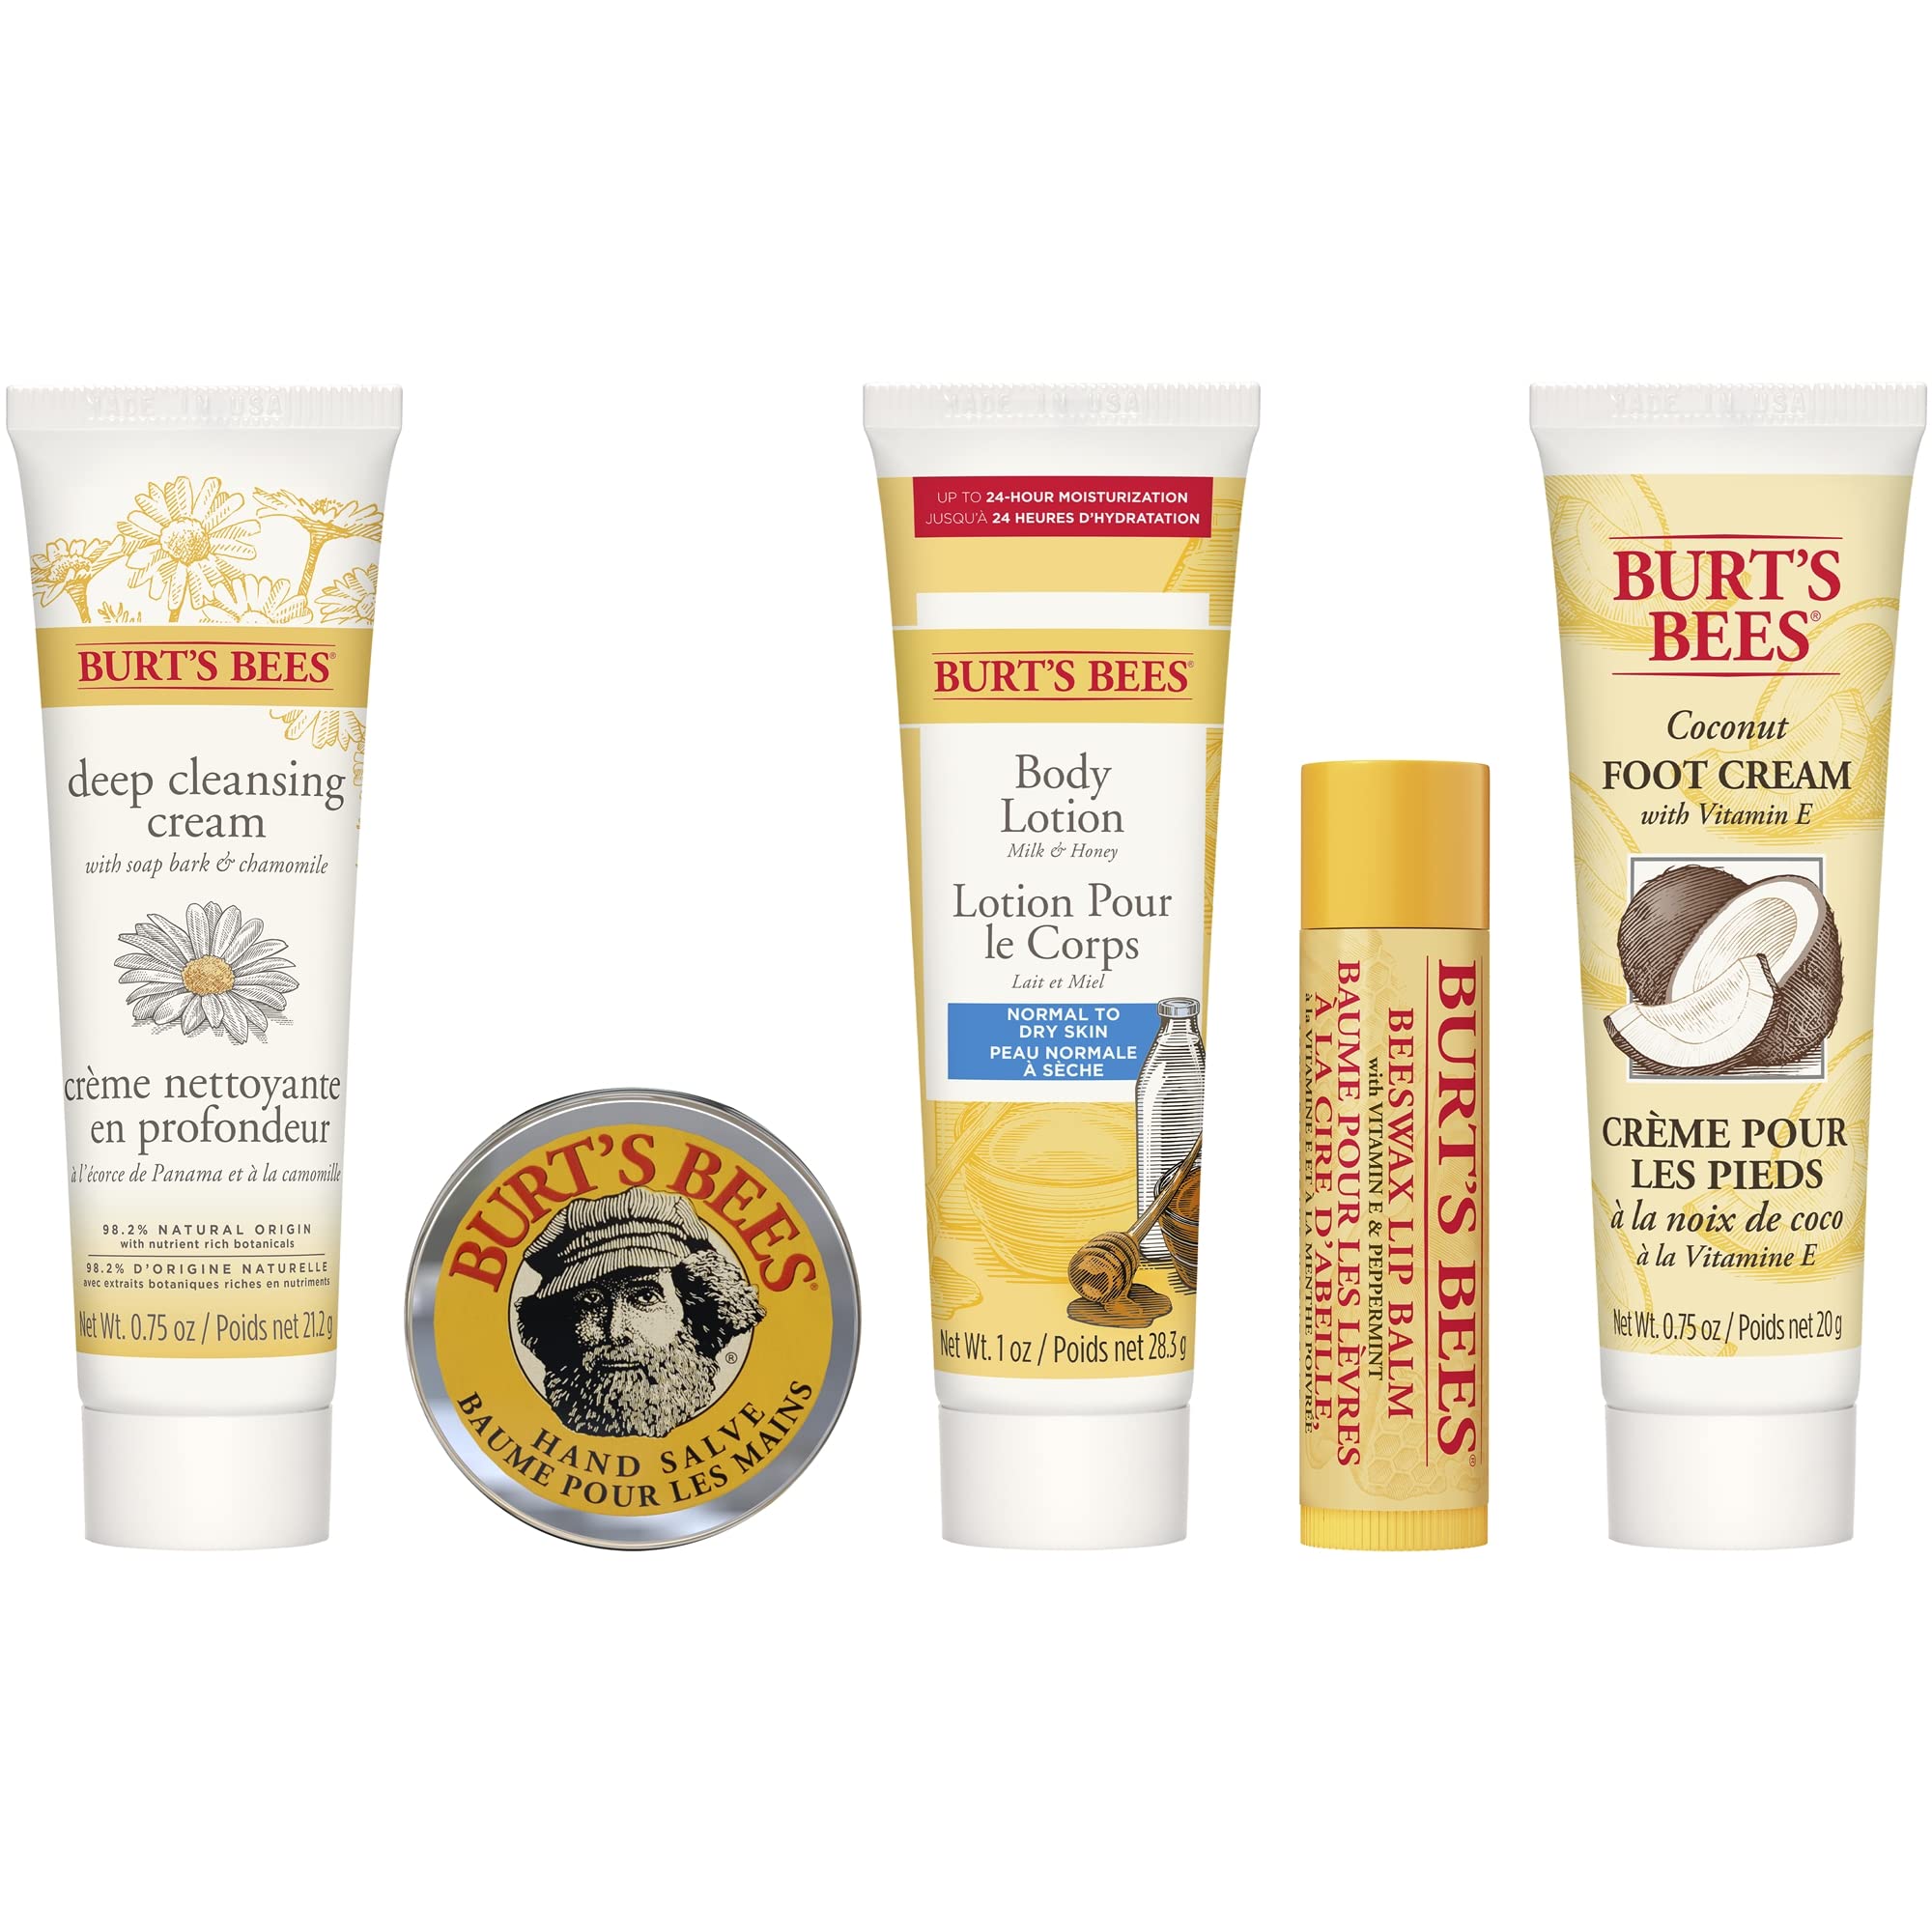 Burt's Bees Gifts Ideas, 5 Body Care Products, Everyday Essentials Set - Beeswax Lip Balm, Deep Cleansing Cream, Hand Salve, Body Lotion & Foot Cream, Travel Size